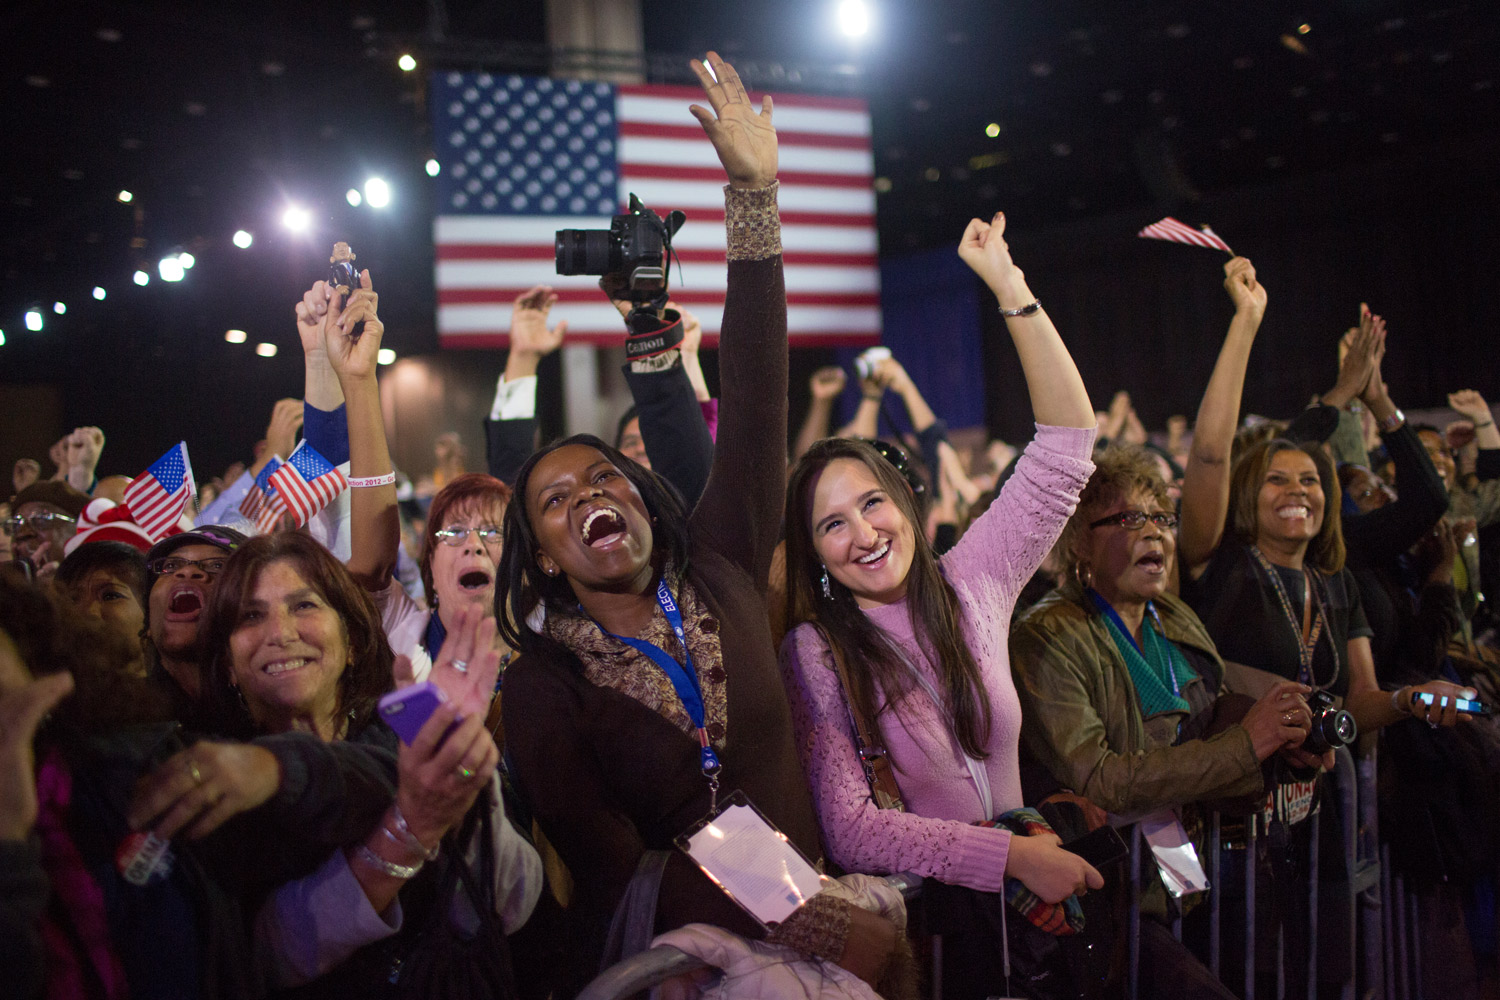 Nov. 6, 2012. Supporters of U.S. President Barack Obama celebrate his victory at his election night rally in Chicago.